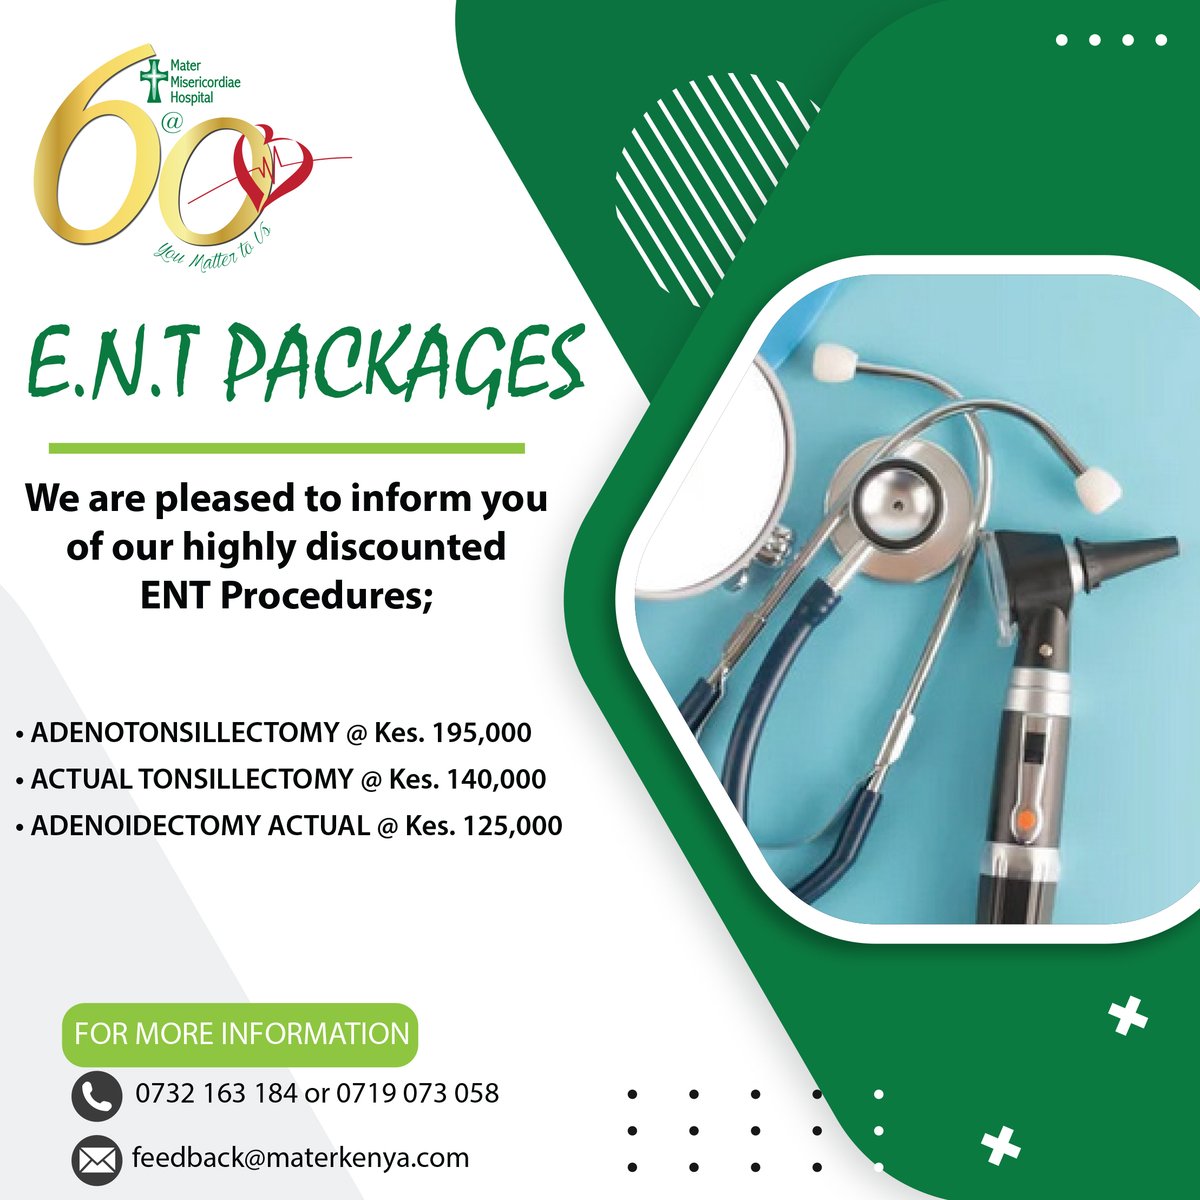 ENT specialists are experts in both medical and surgical management of conditions of the Ear, Nose, Throat and ENT-related conditions of the head and neck. We offer a wide range of ENT procedures at an affordable fee. See poster for details.